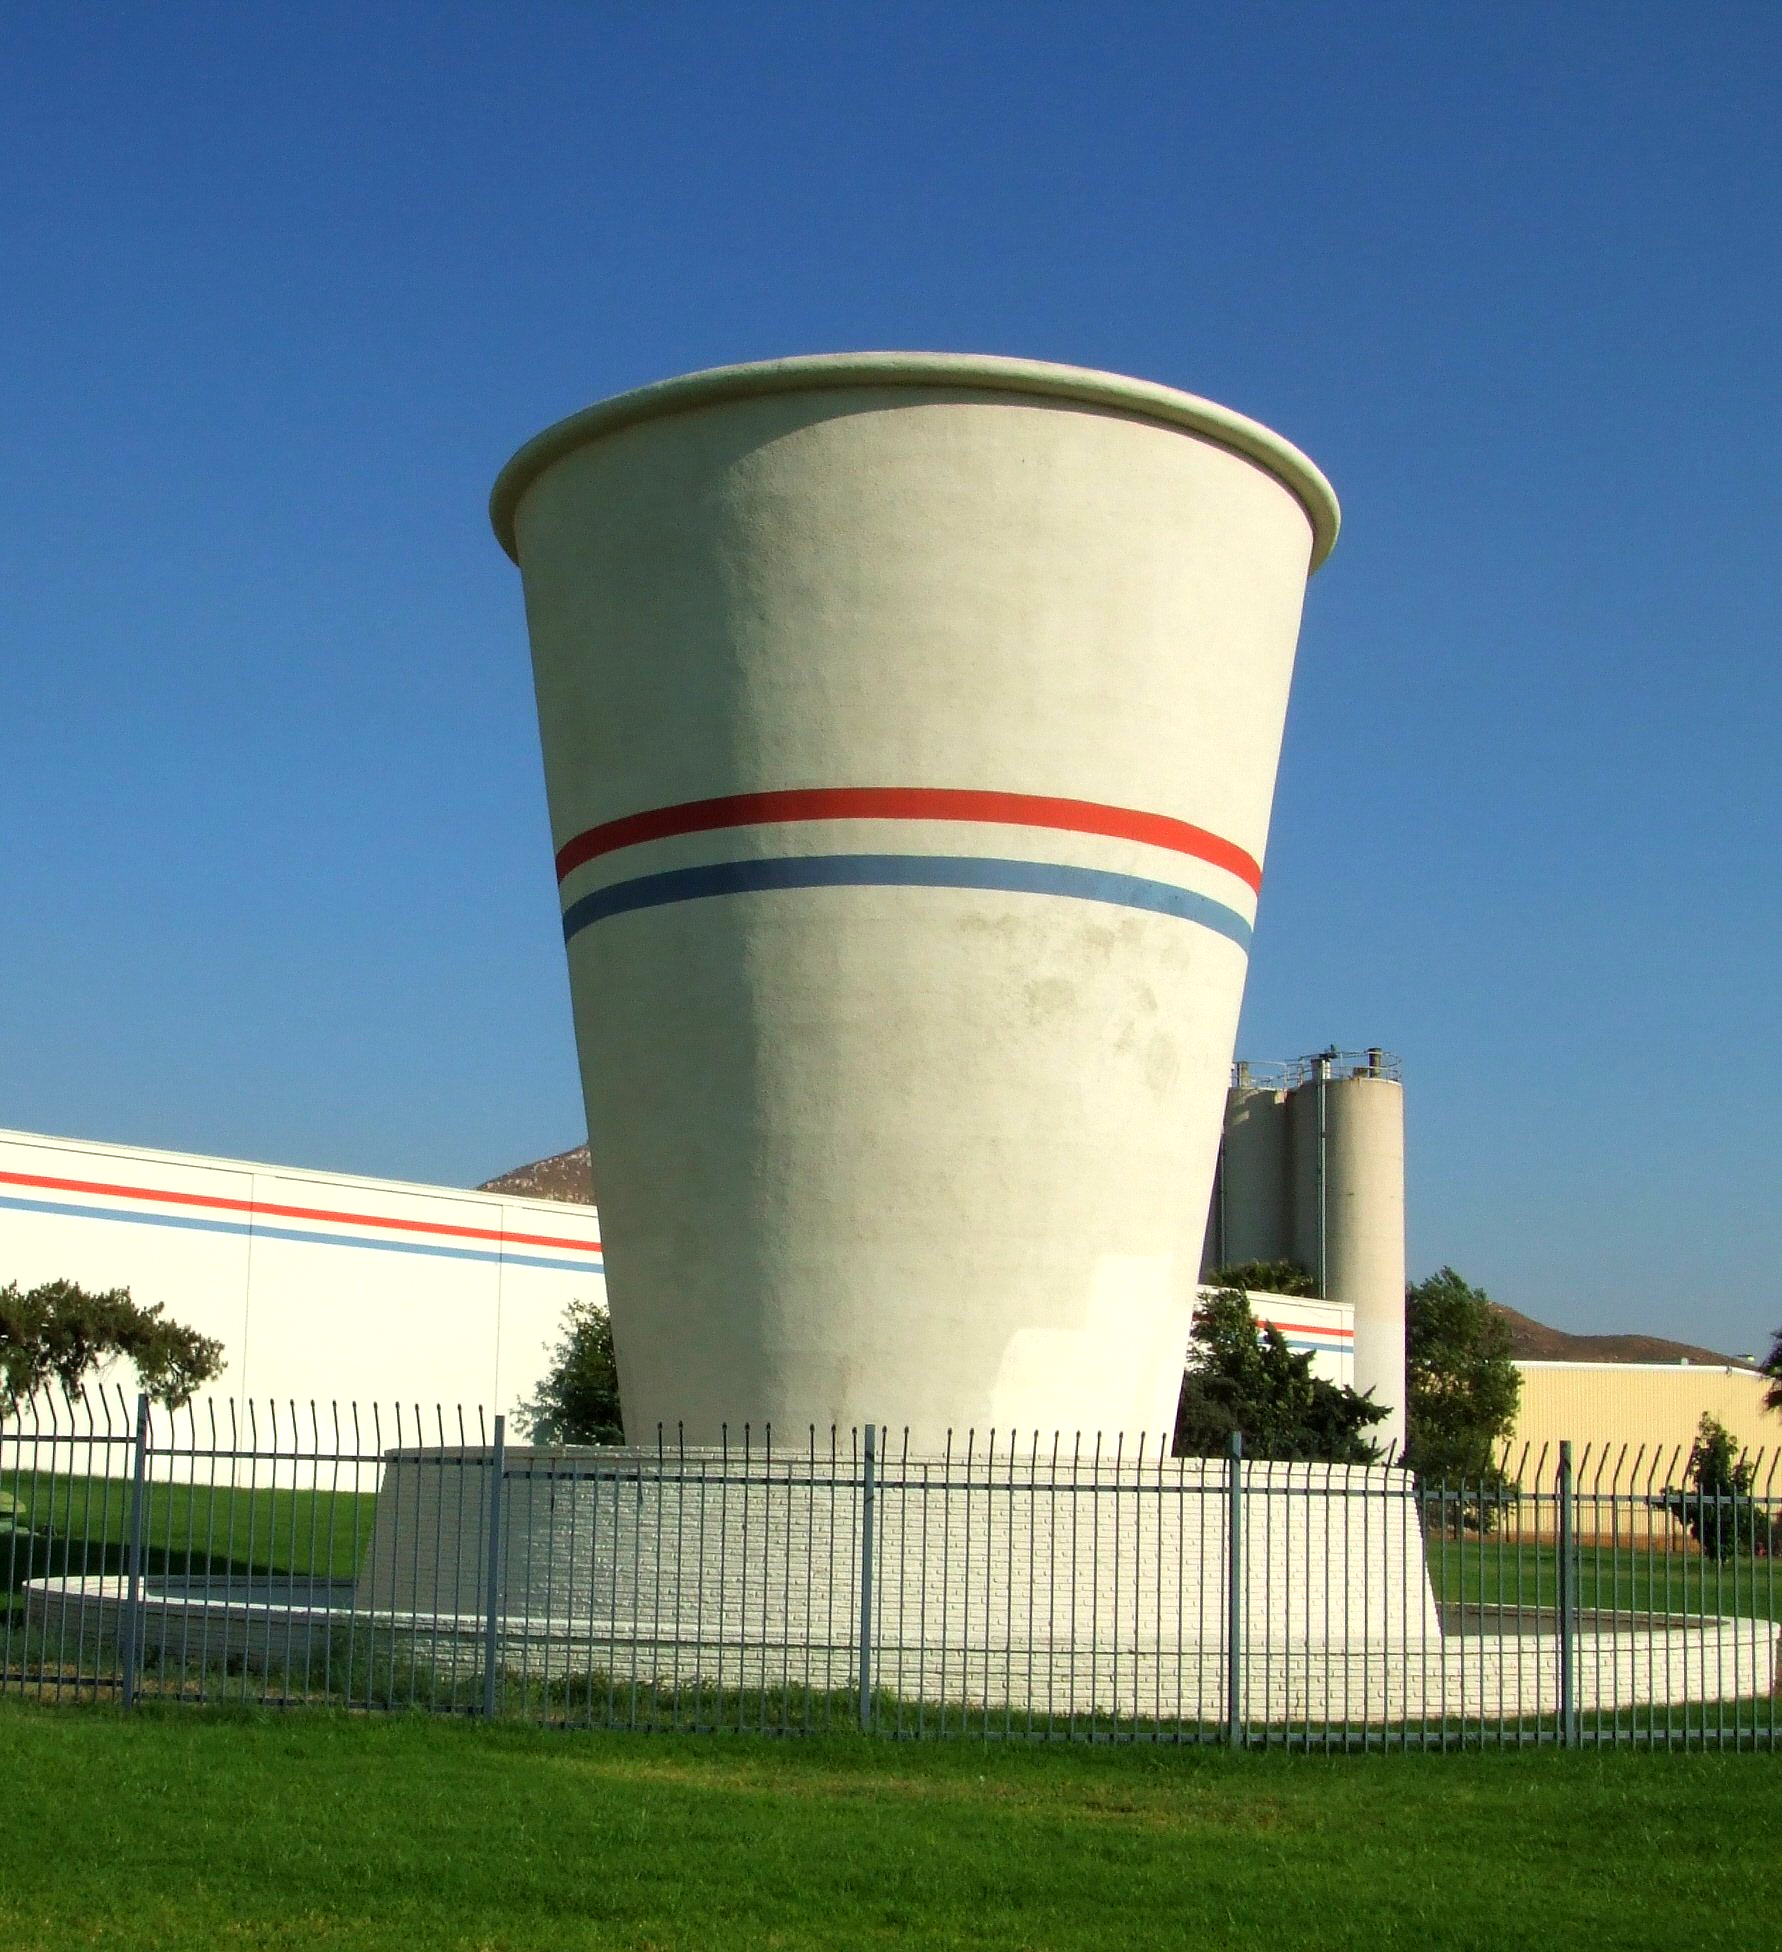 World's Largest Paper Cup Sculpture: world record set in Riverside, California